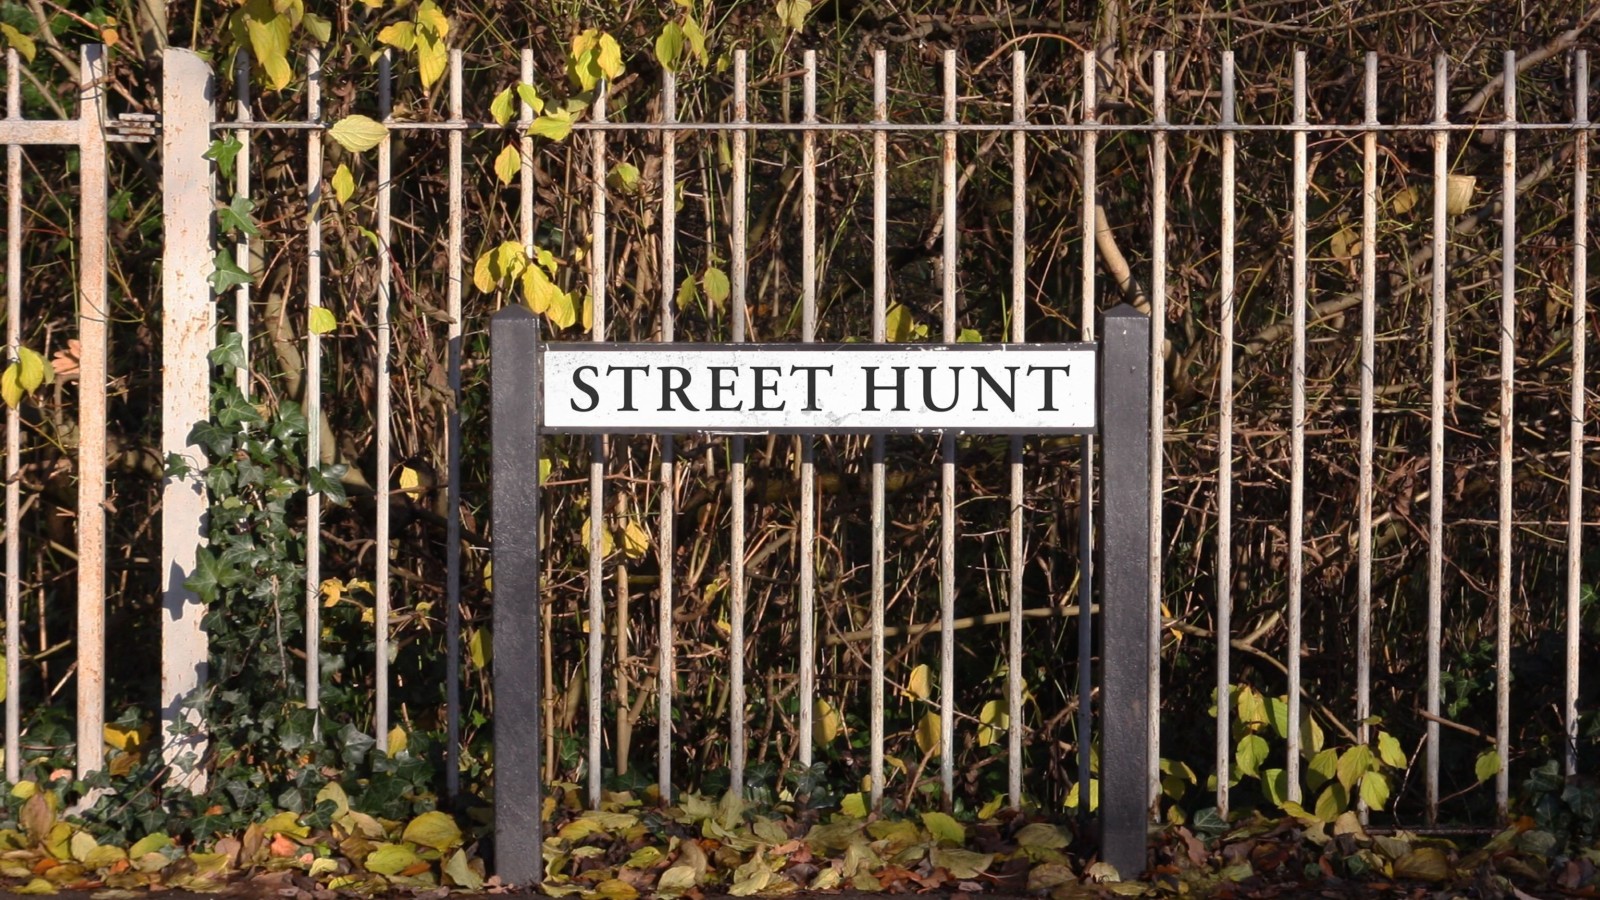 A road name that reads 'Street Hunt' set against a background of white railings and foliage.